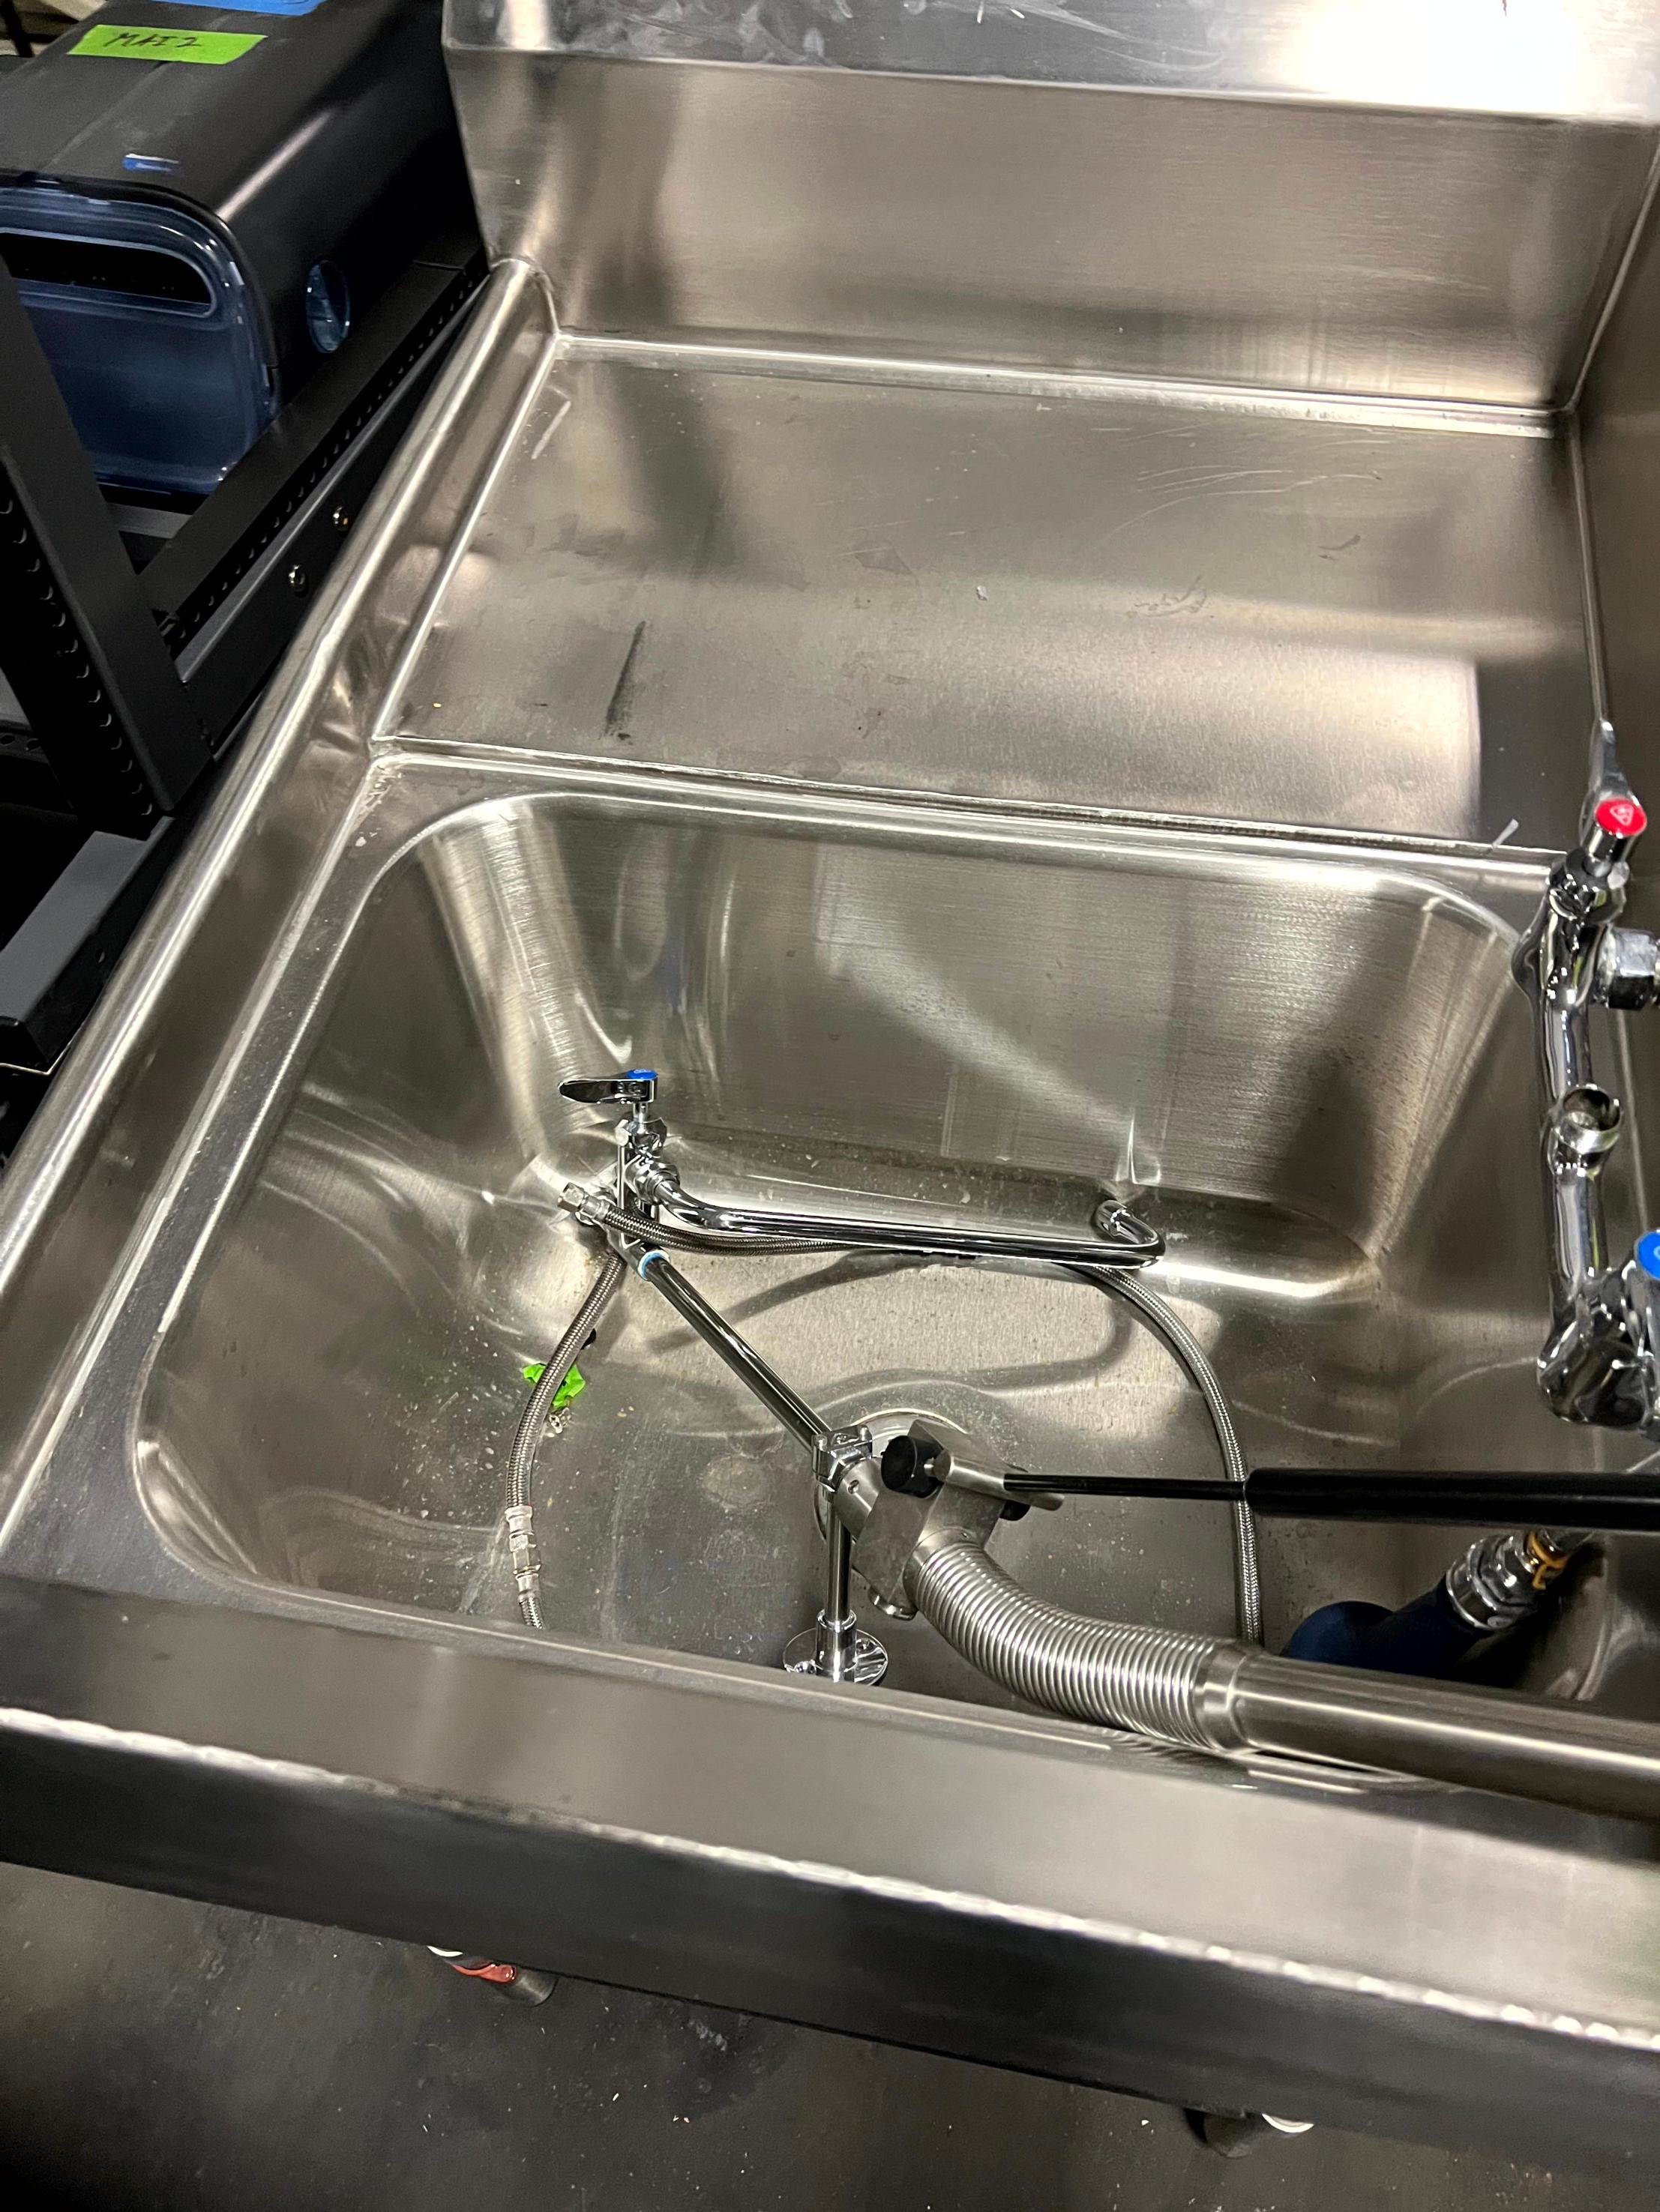 Single Compartment Stainless Sink